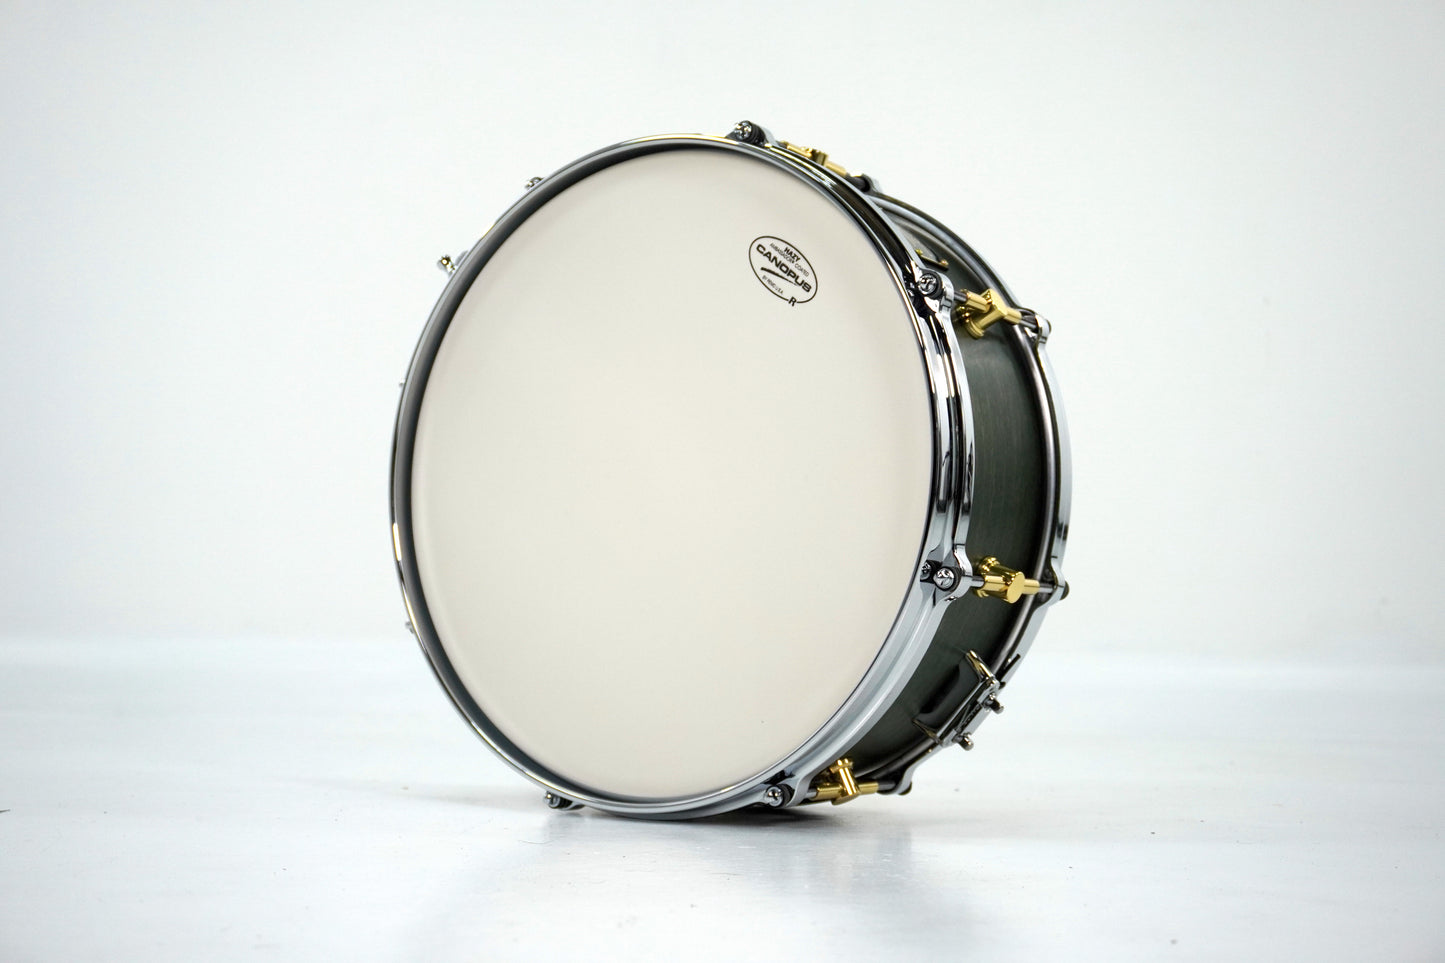 Canopus 14 x 5.5” 10ply Maple Snare Drum in Black Olive Oil